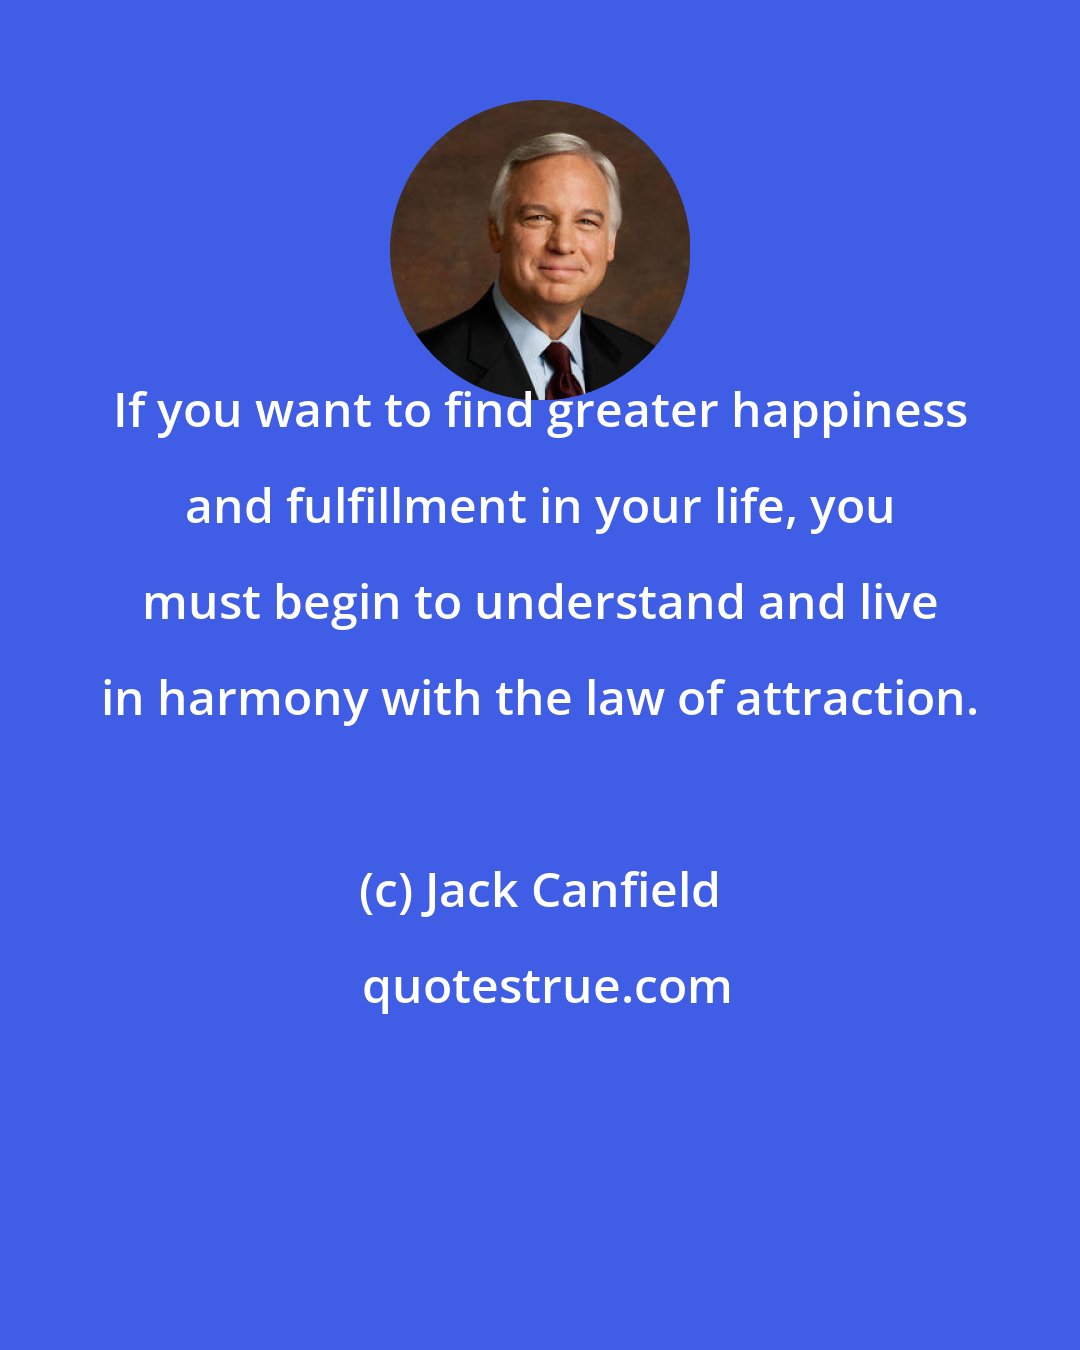 Jack Canfield: If you want to find greater happiness and fulfillment in your life, you must begin to understand and live in harmony with the law of attraction.